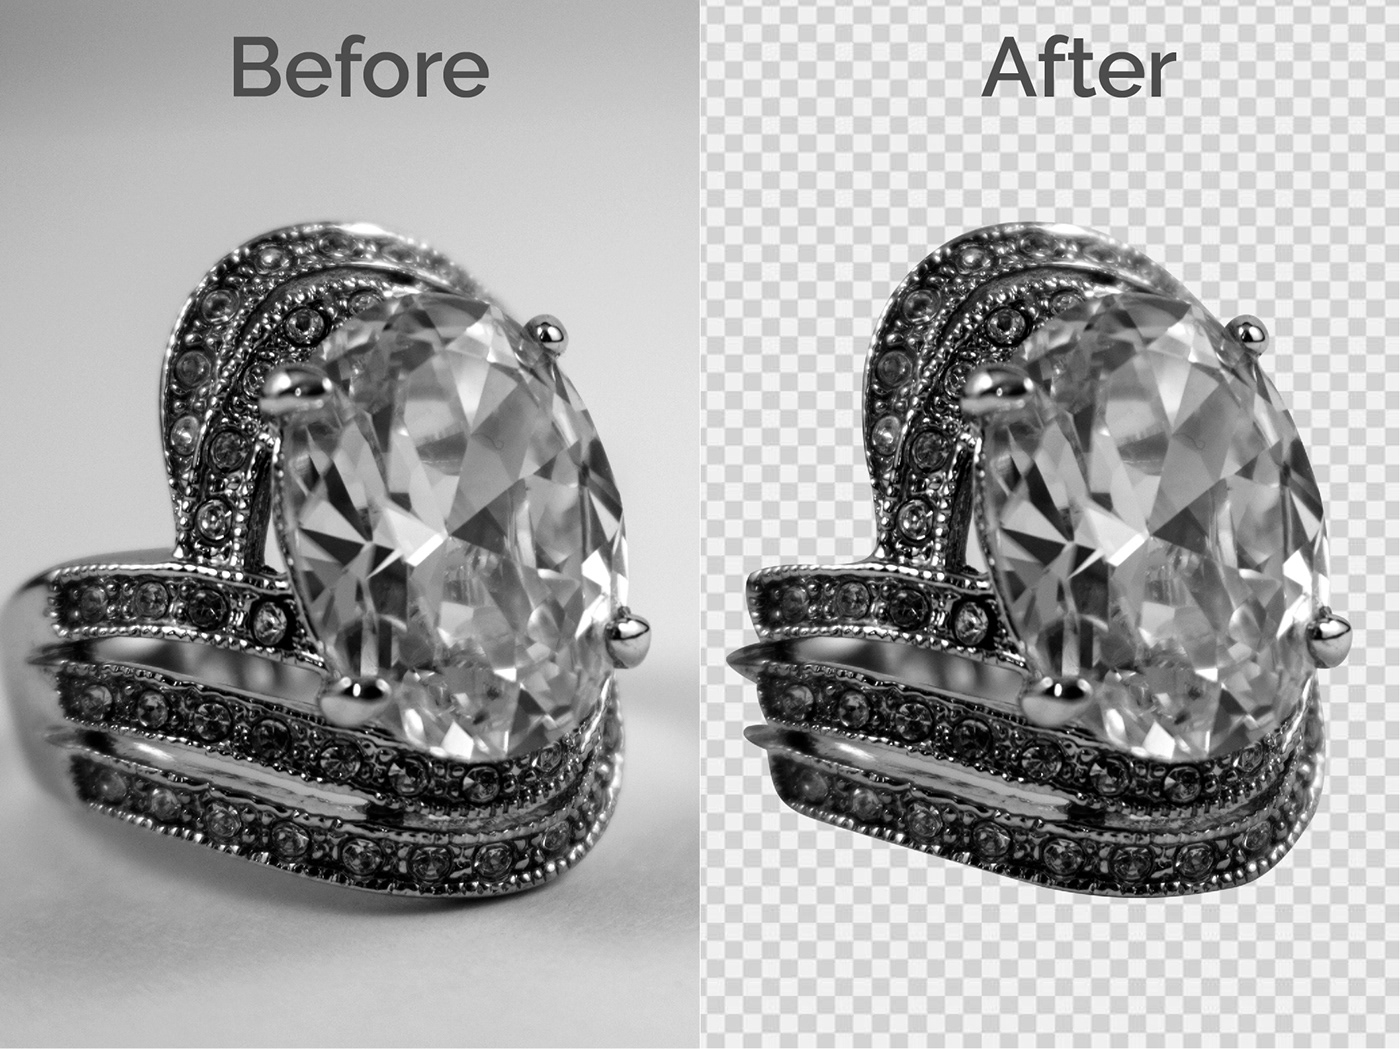 Background remove and clipping path